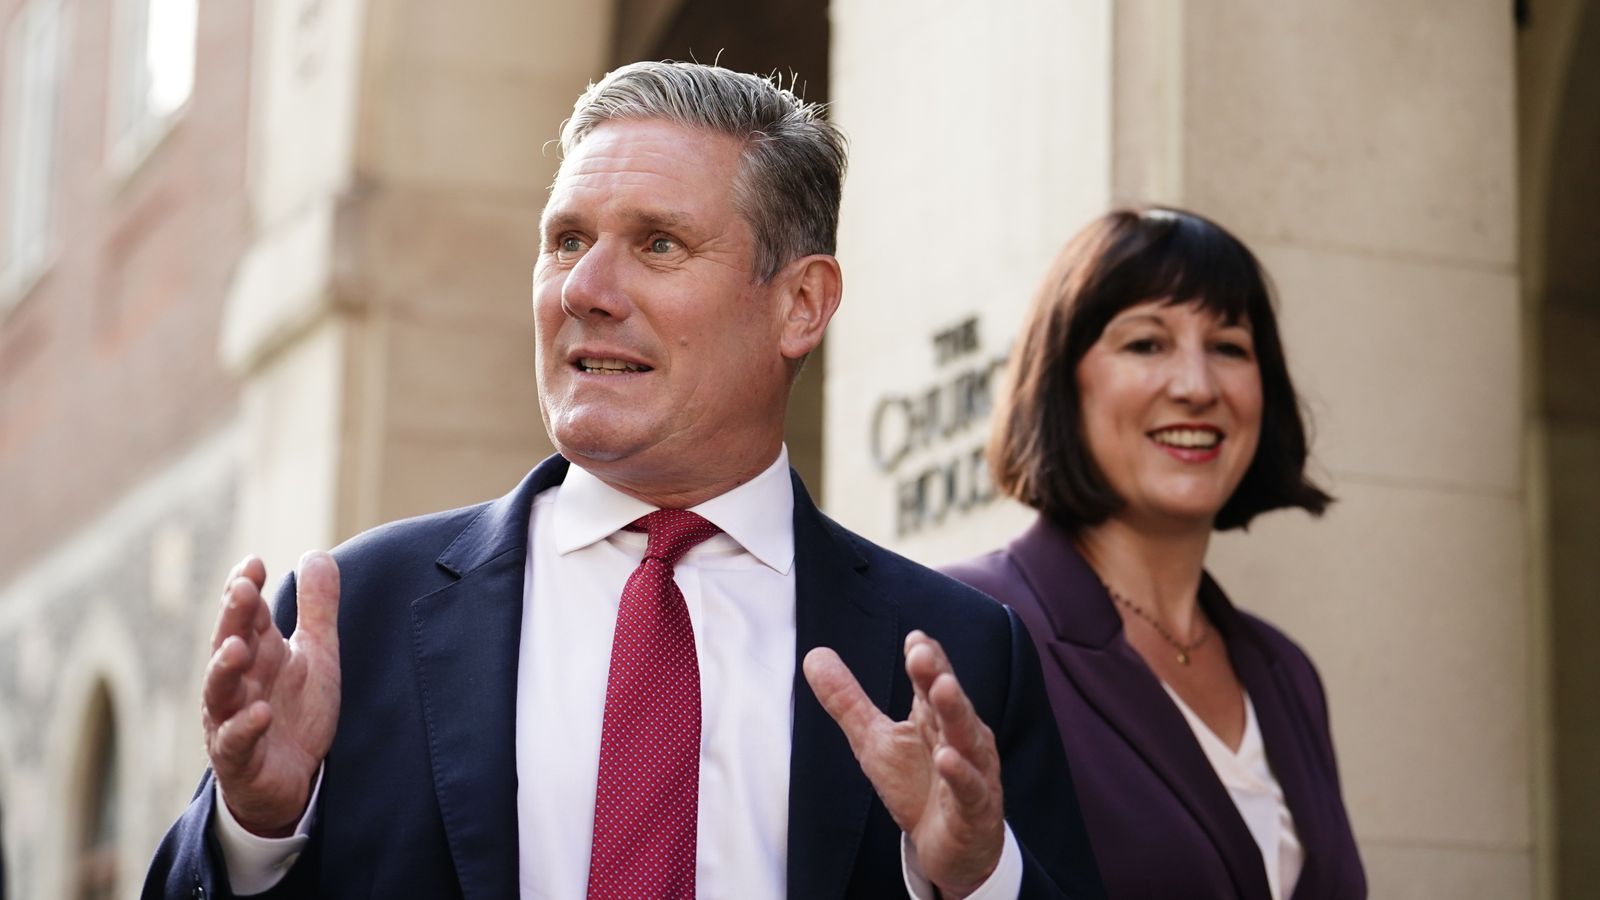 Sir Keir Starmer fails to rule out tax burden rise under Labour